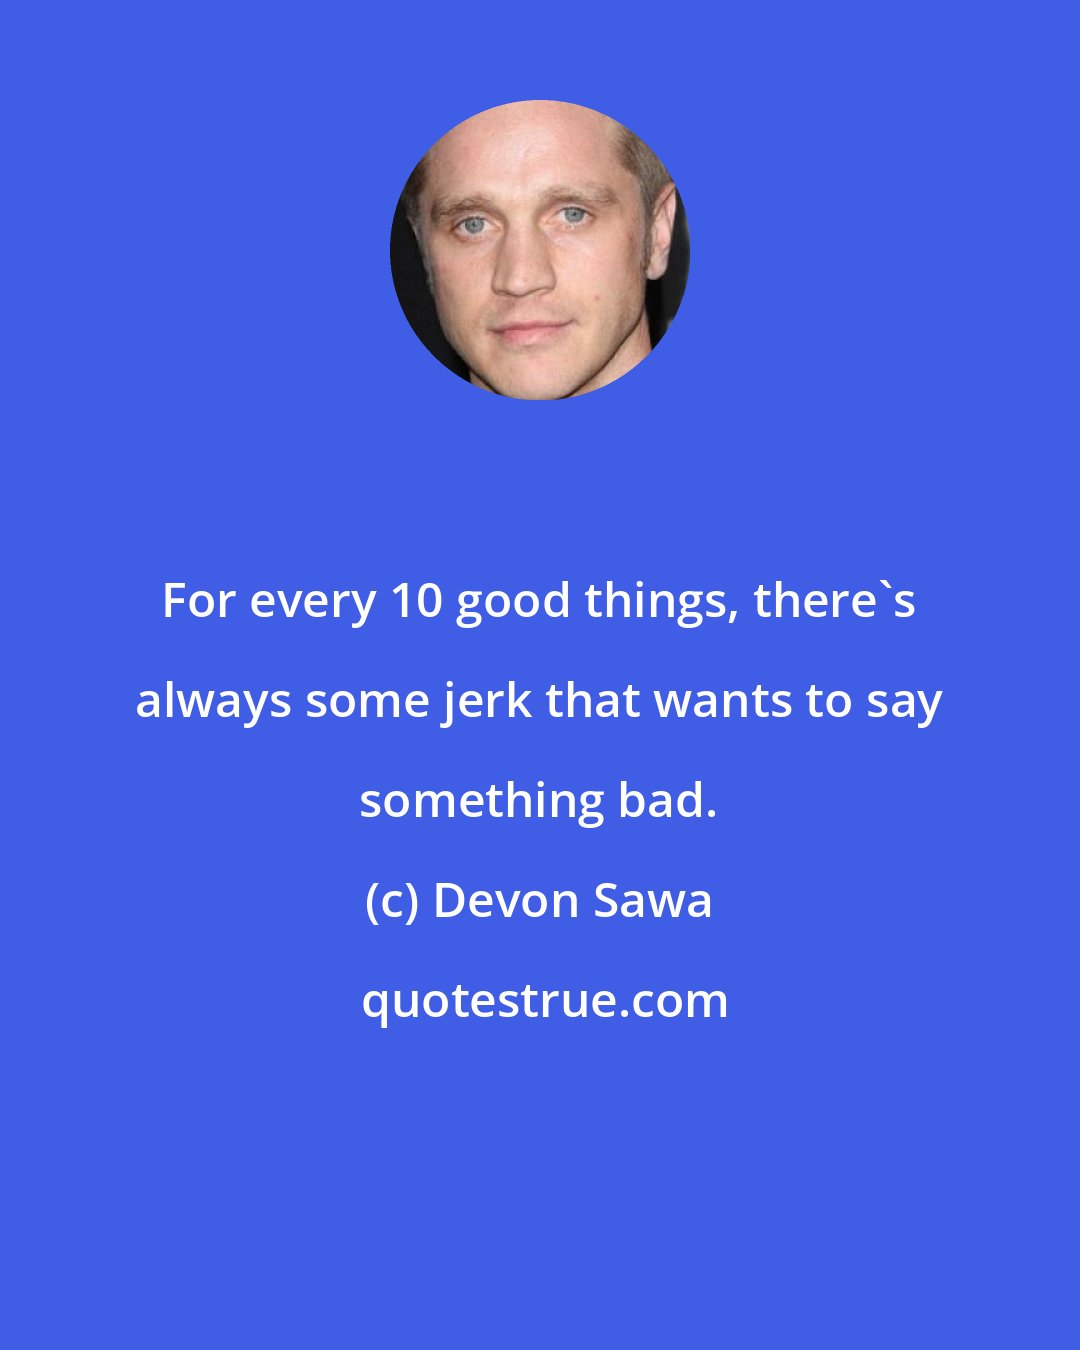 Devon Sawa: For every 10 good things, there's always some jerk that wants to say something bad.